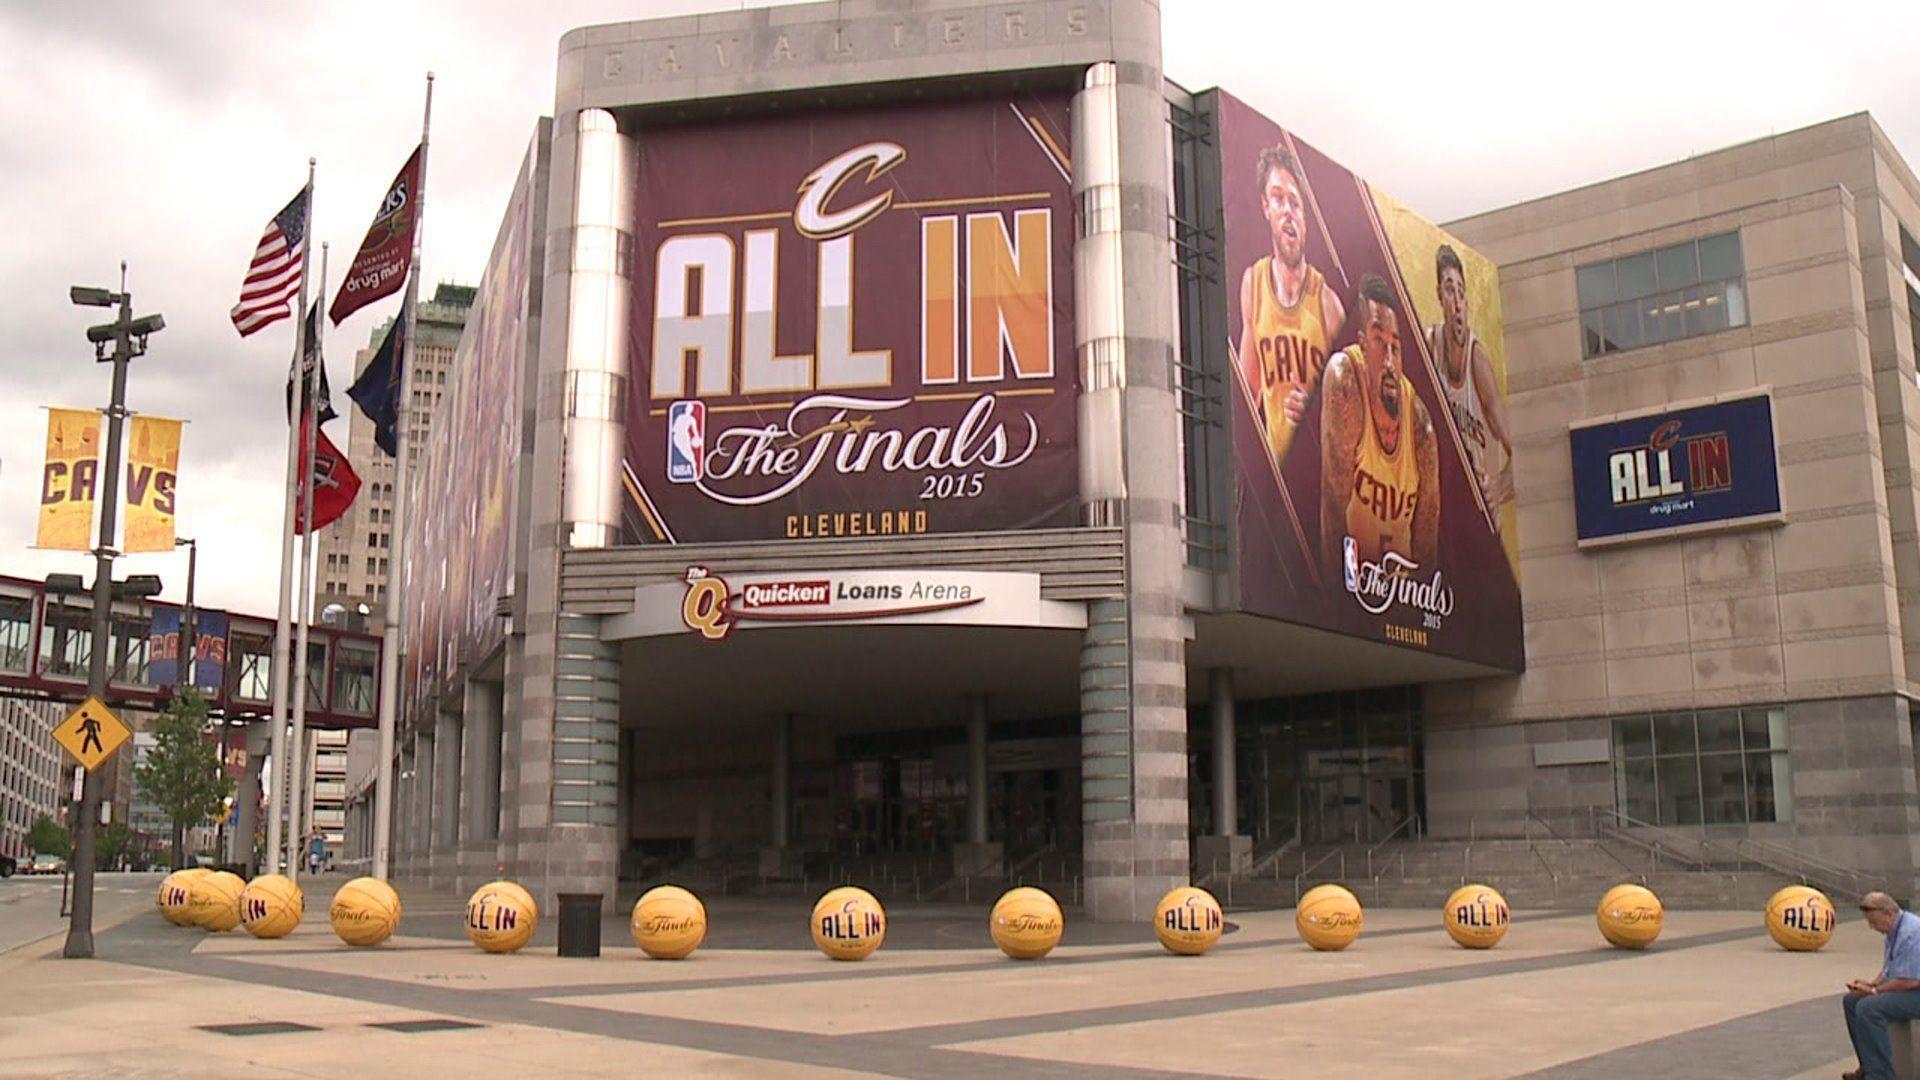 From parking to partying, your guide to Games 3 & 4 of NBA Finals